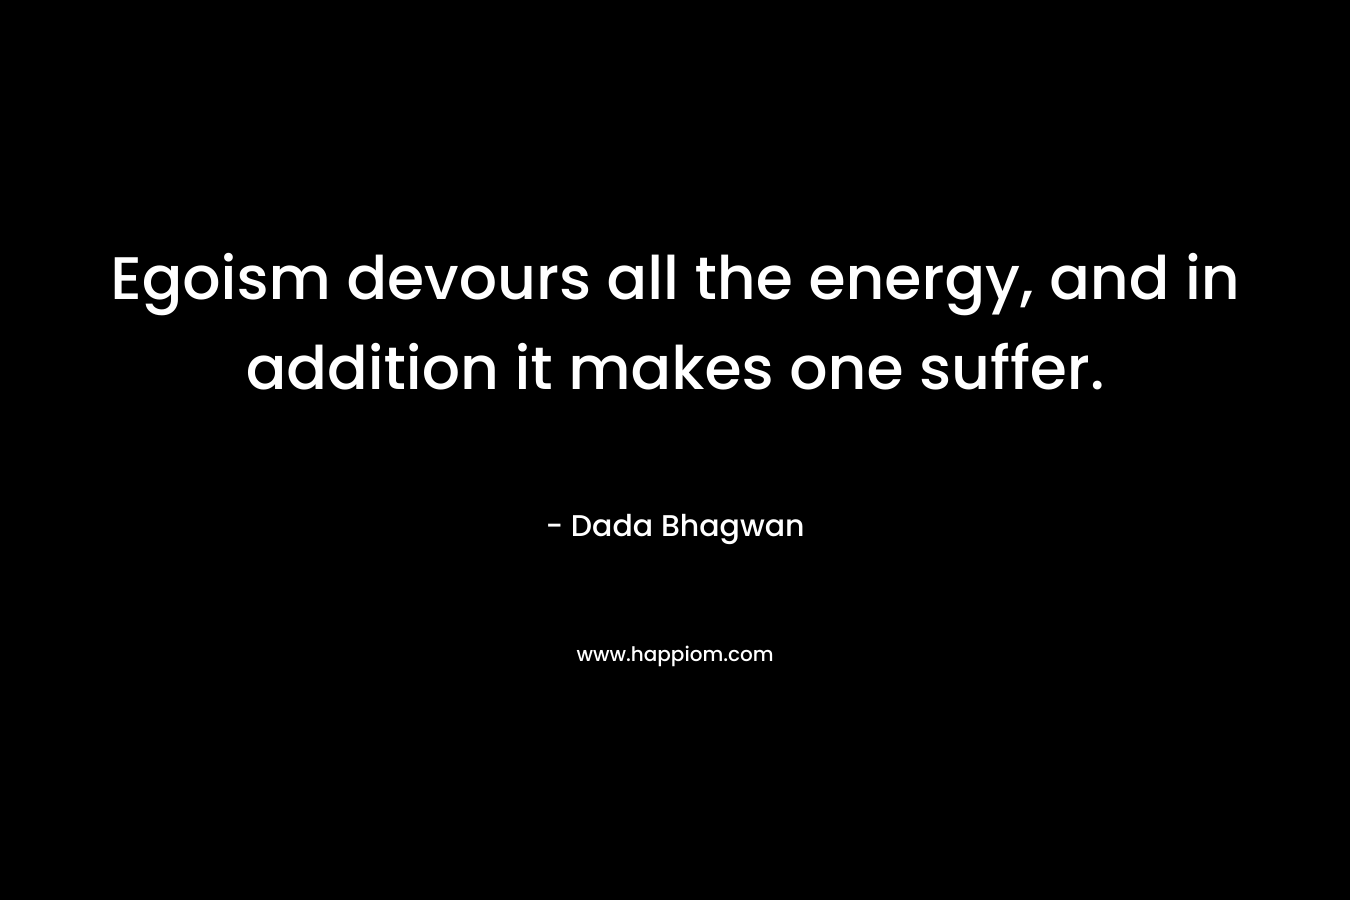 Egoism devours all the energy, and in addition it makes one suffer. – Dada Bhagwan